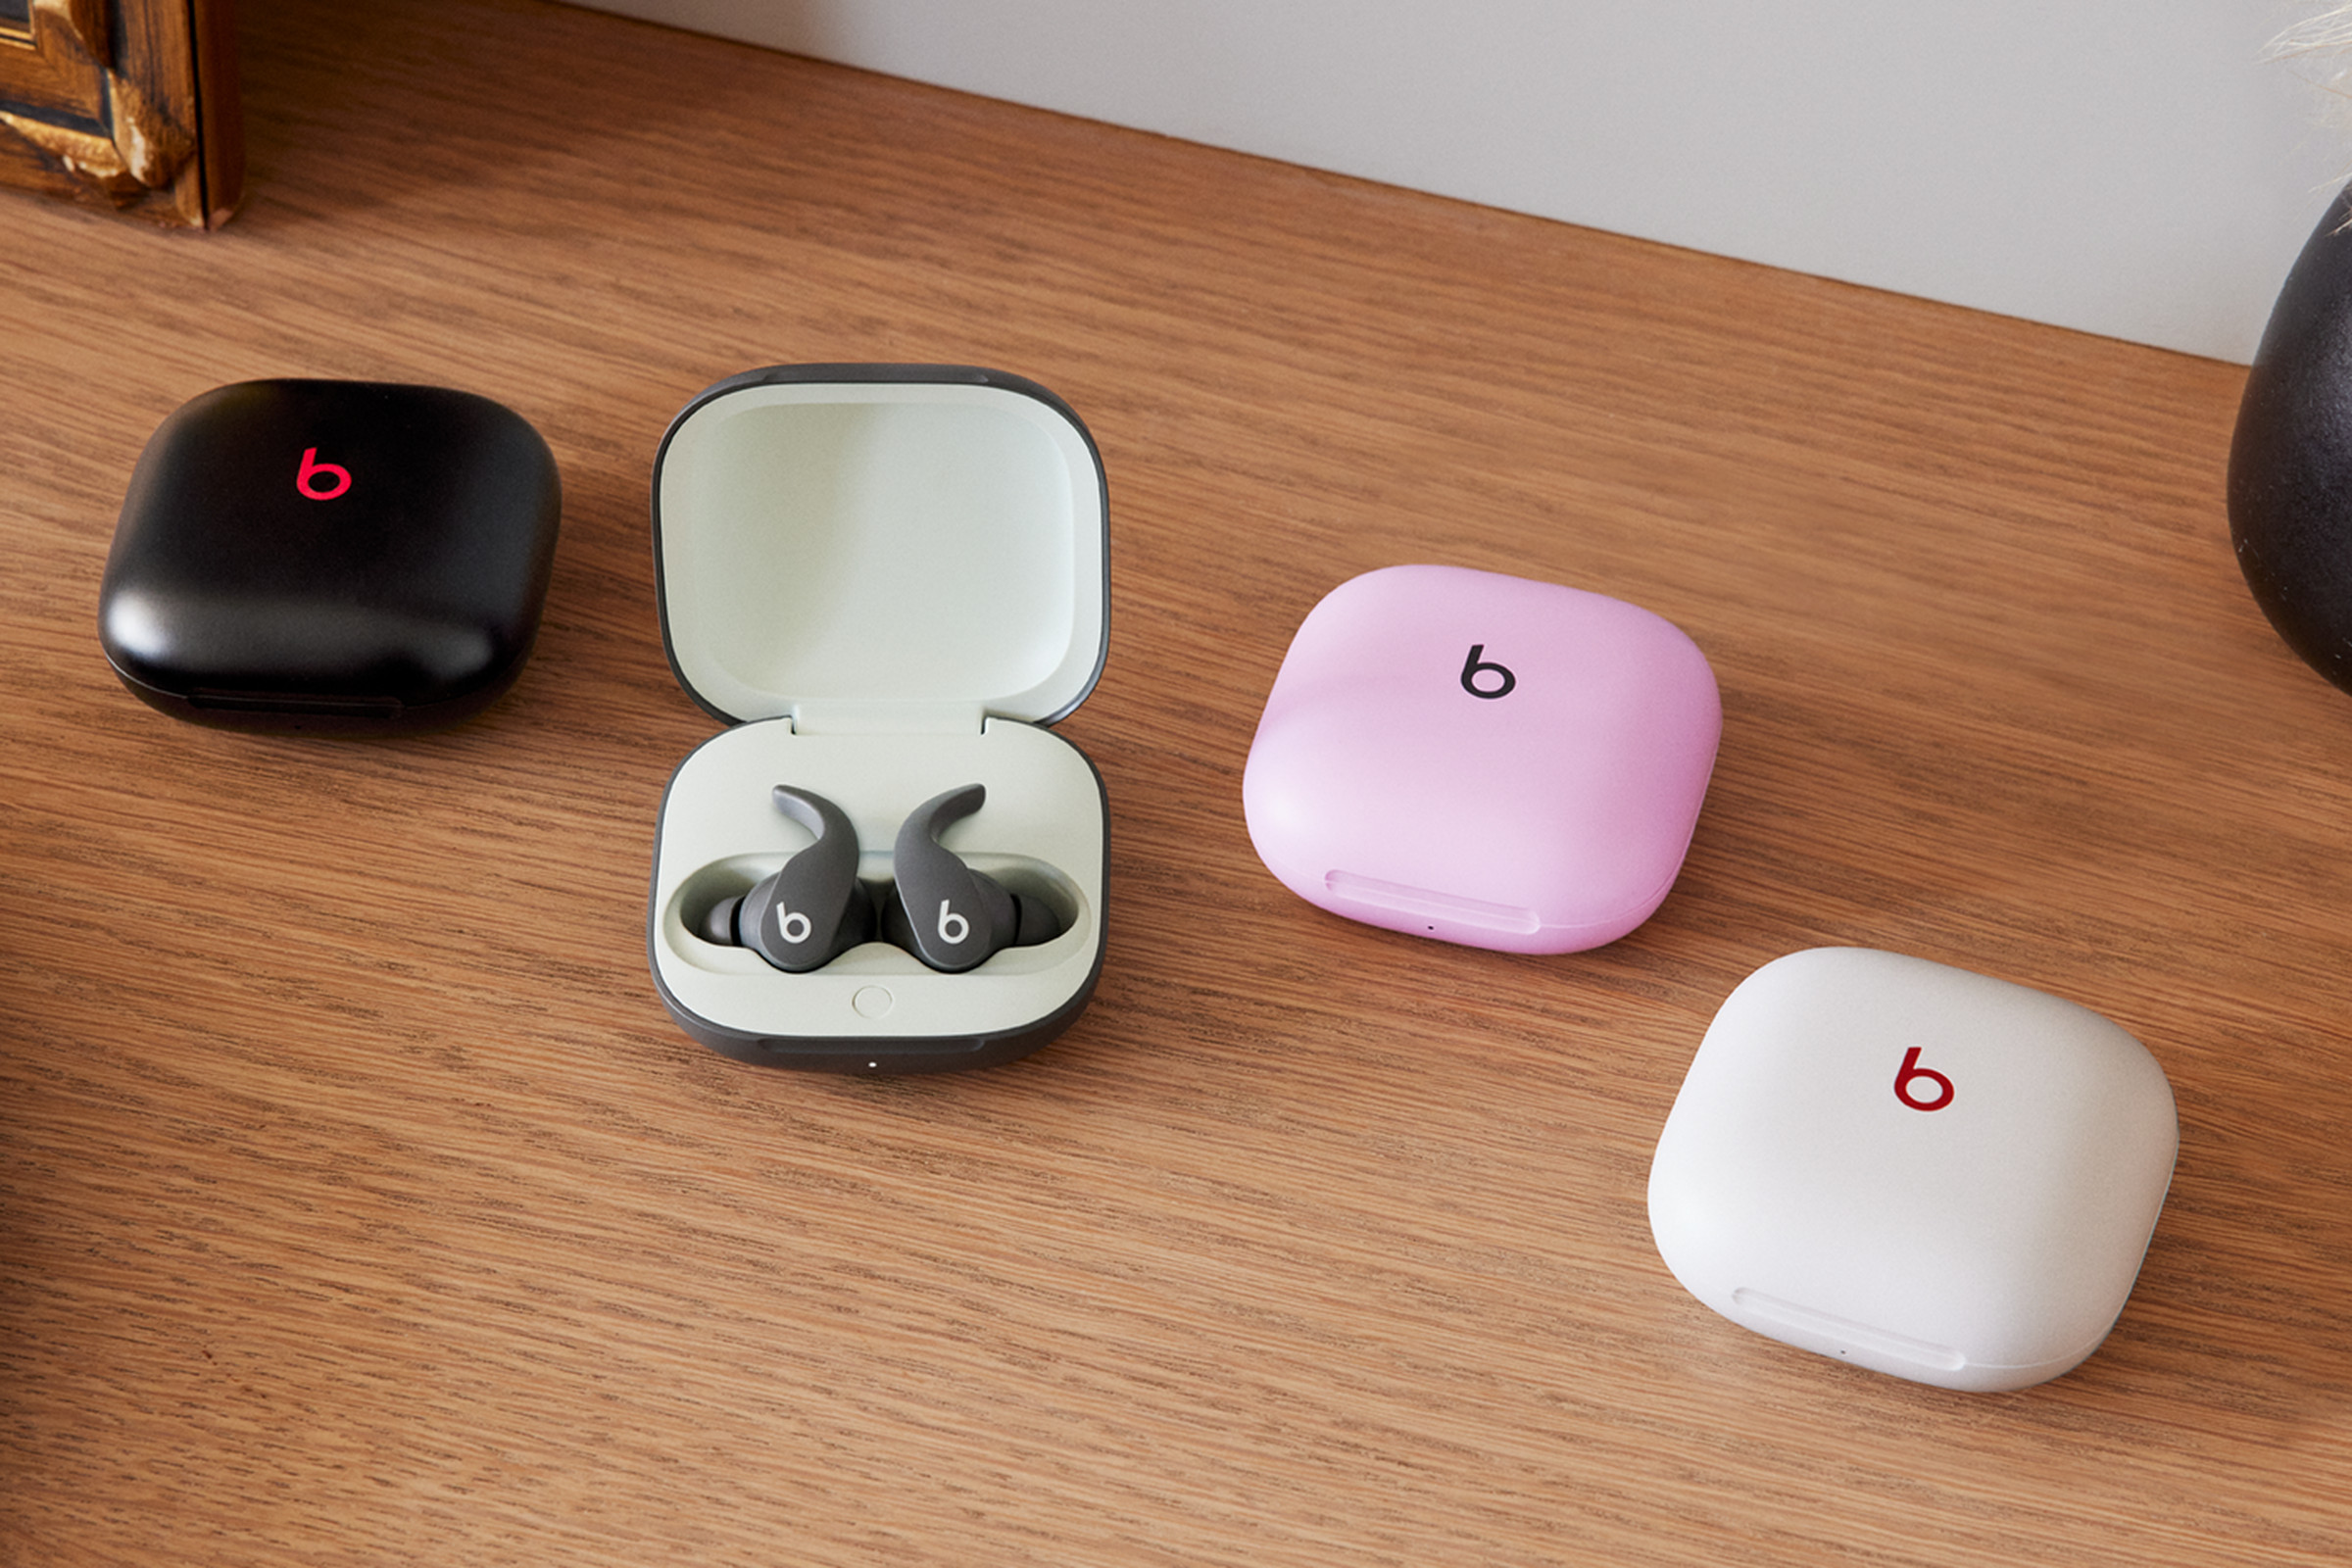 The Beats Fit Pro come in black, gray, white, and pink. Today’s deal is on the black and white colorways.